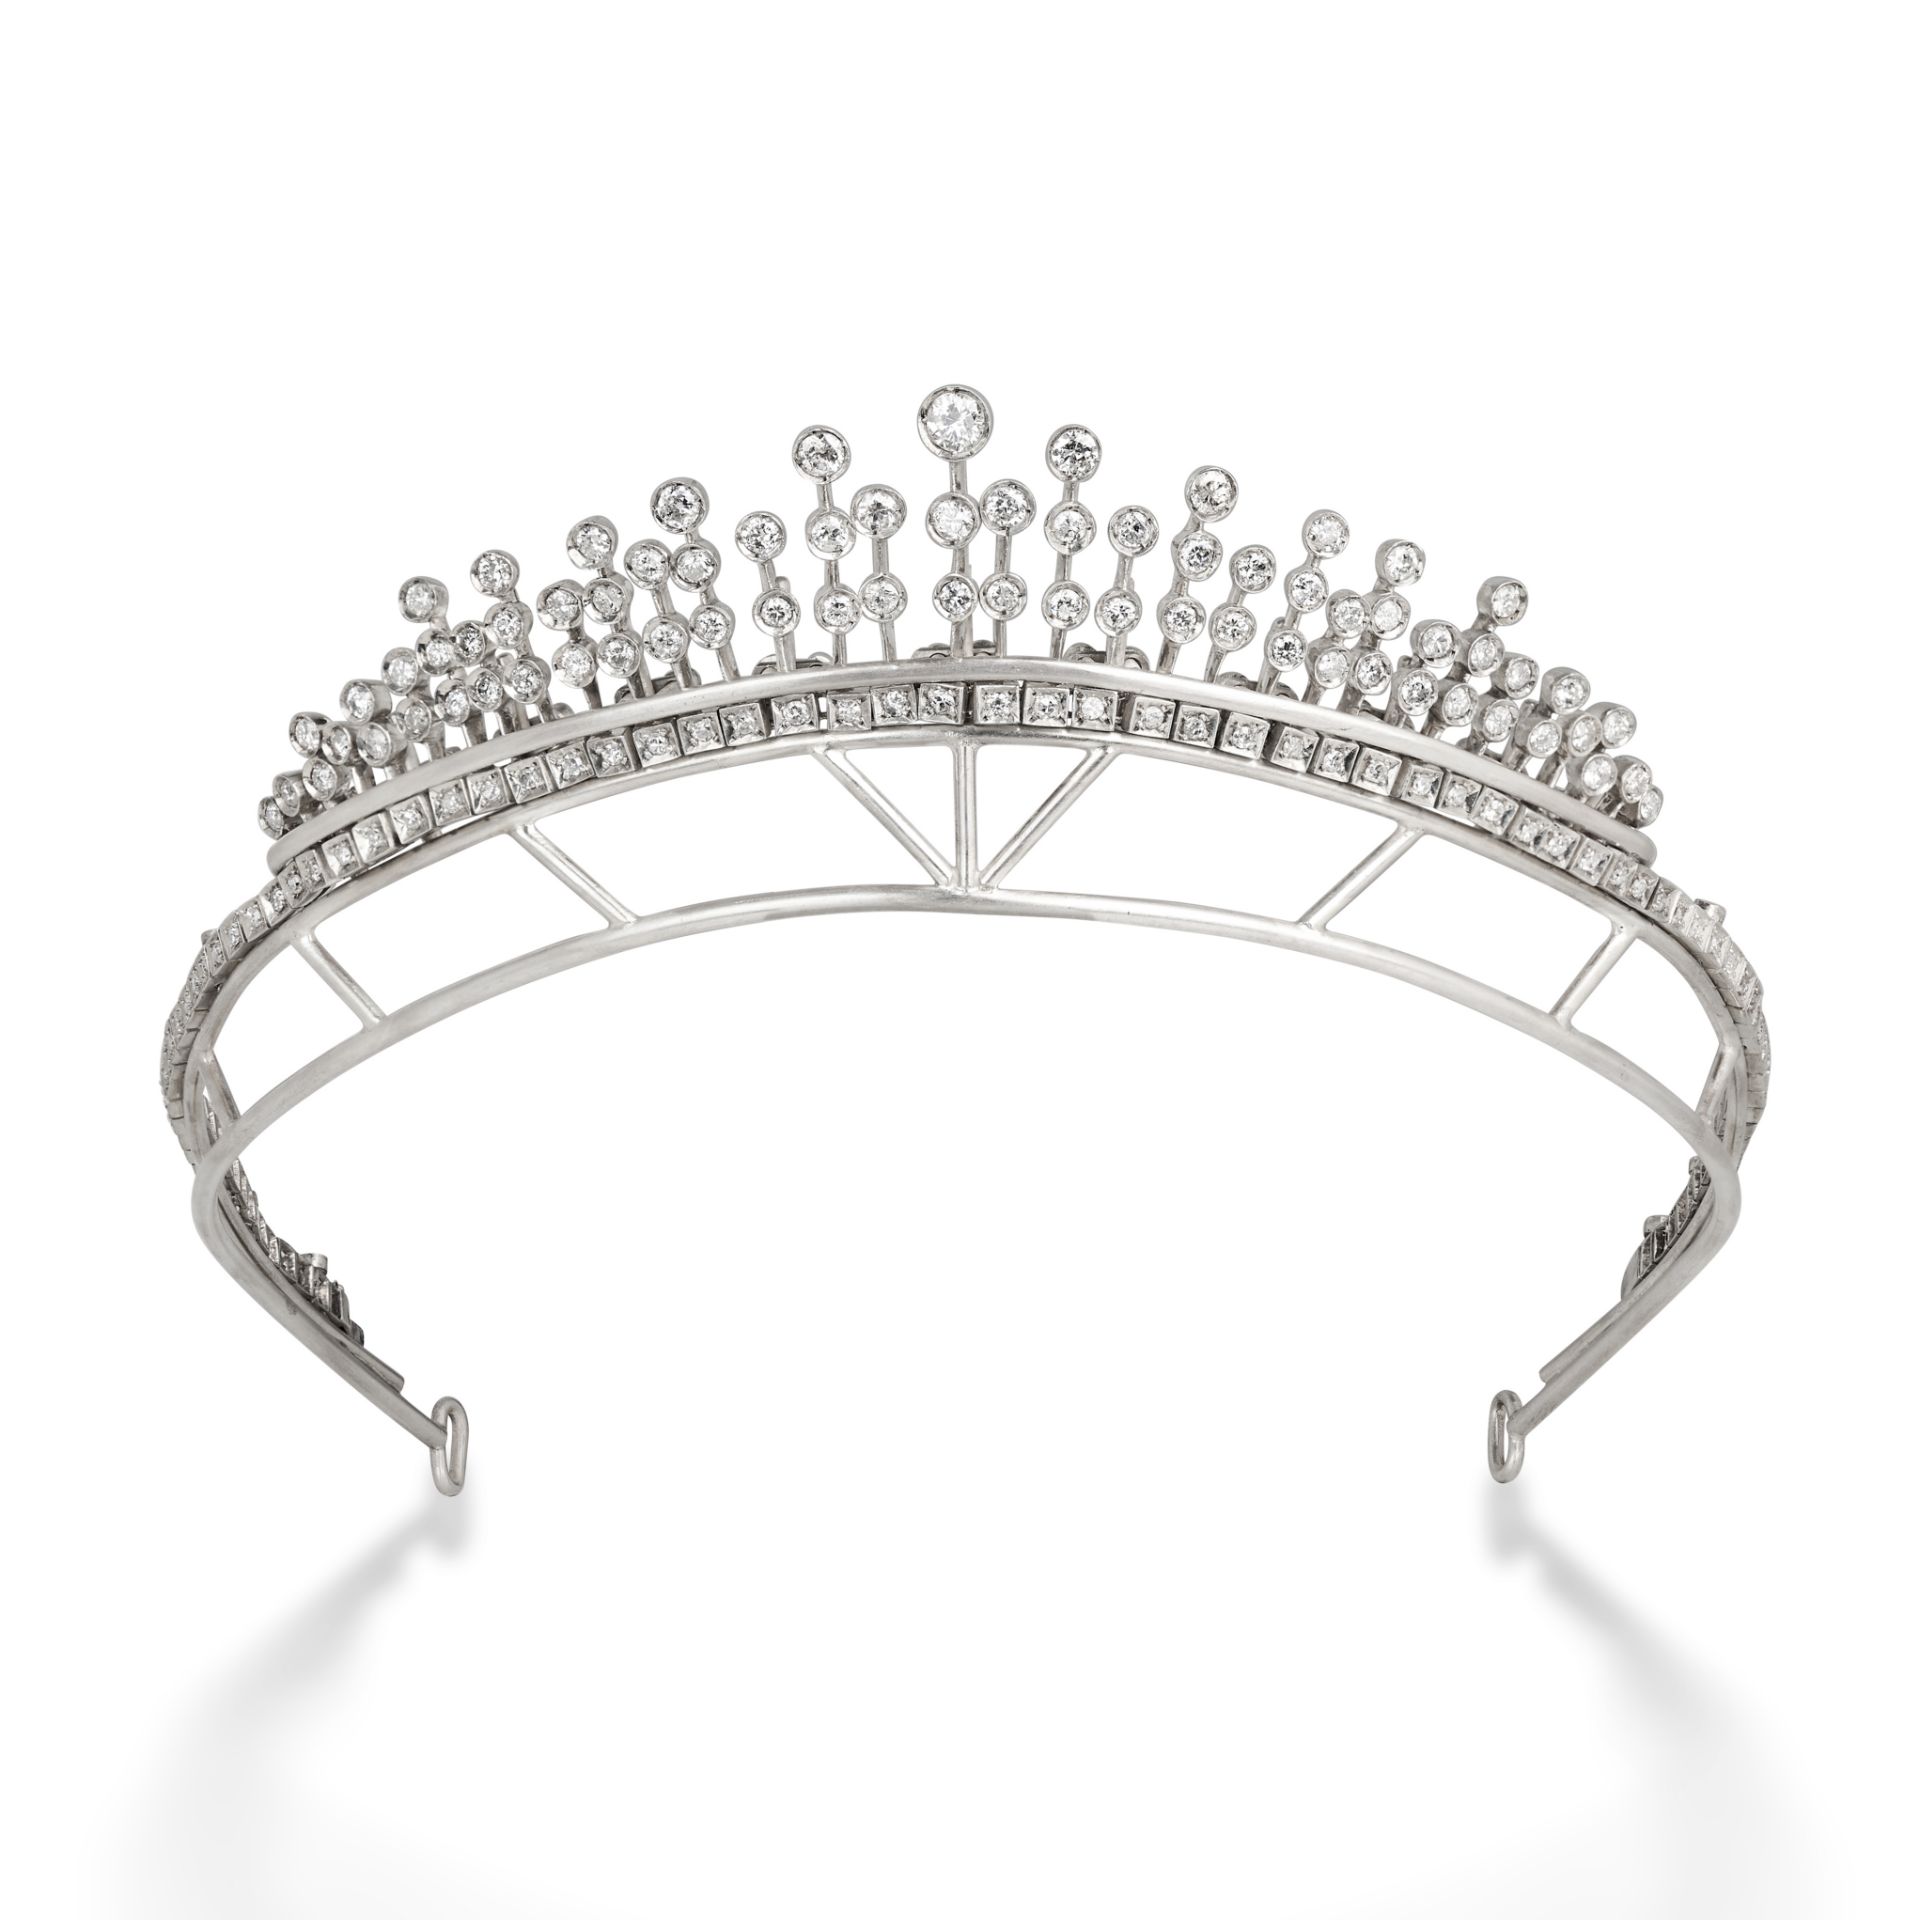 A DIAMOND FRINGE TIARA comprising a graduating row of fringes set with old and round cut diamonds...